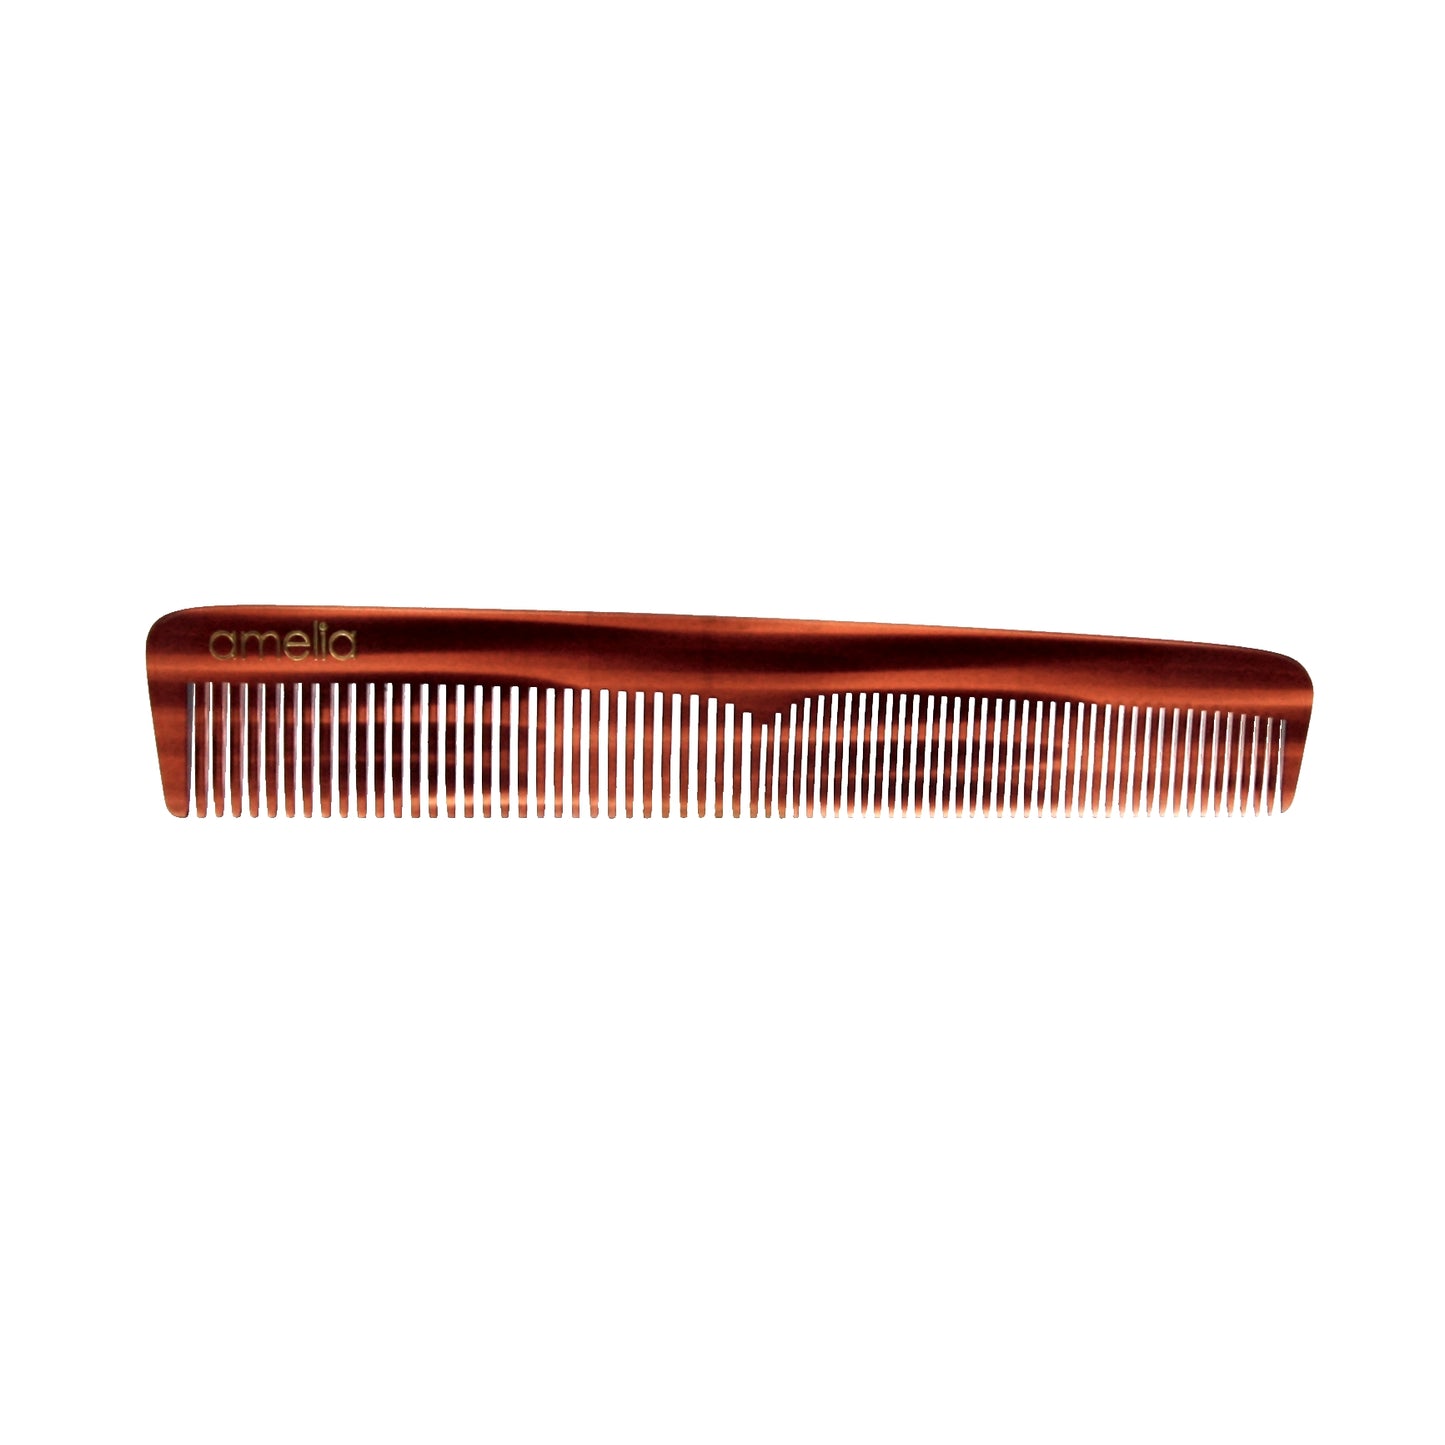 Amelia Beauty Cellulose Acetate 7in Styling Comb, Handmade, Smooth Edges, Eco-Friendly Plant Based Material, Fine and Course Teeth - Tortoise Shell Color